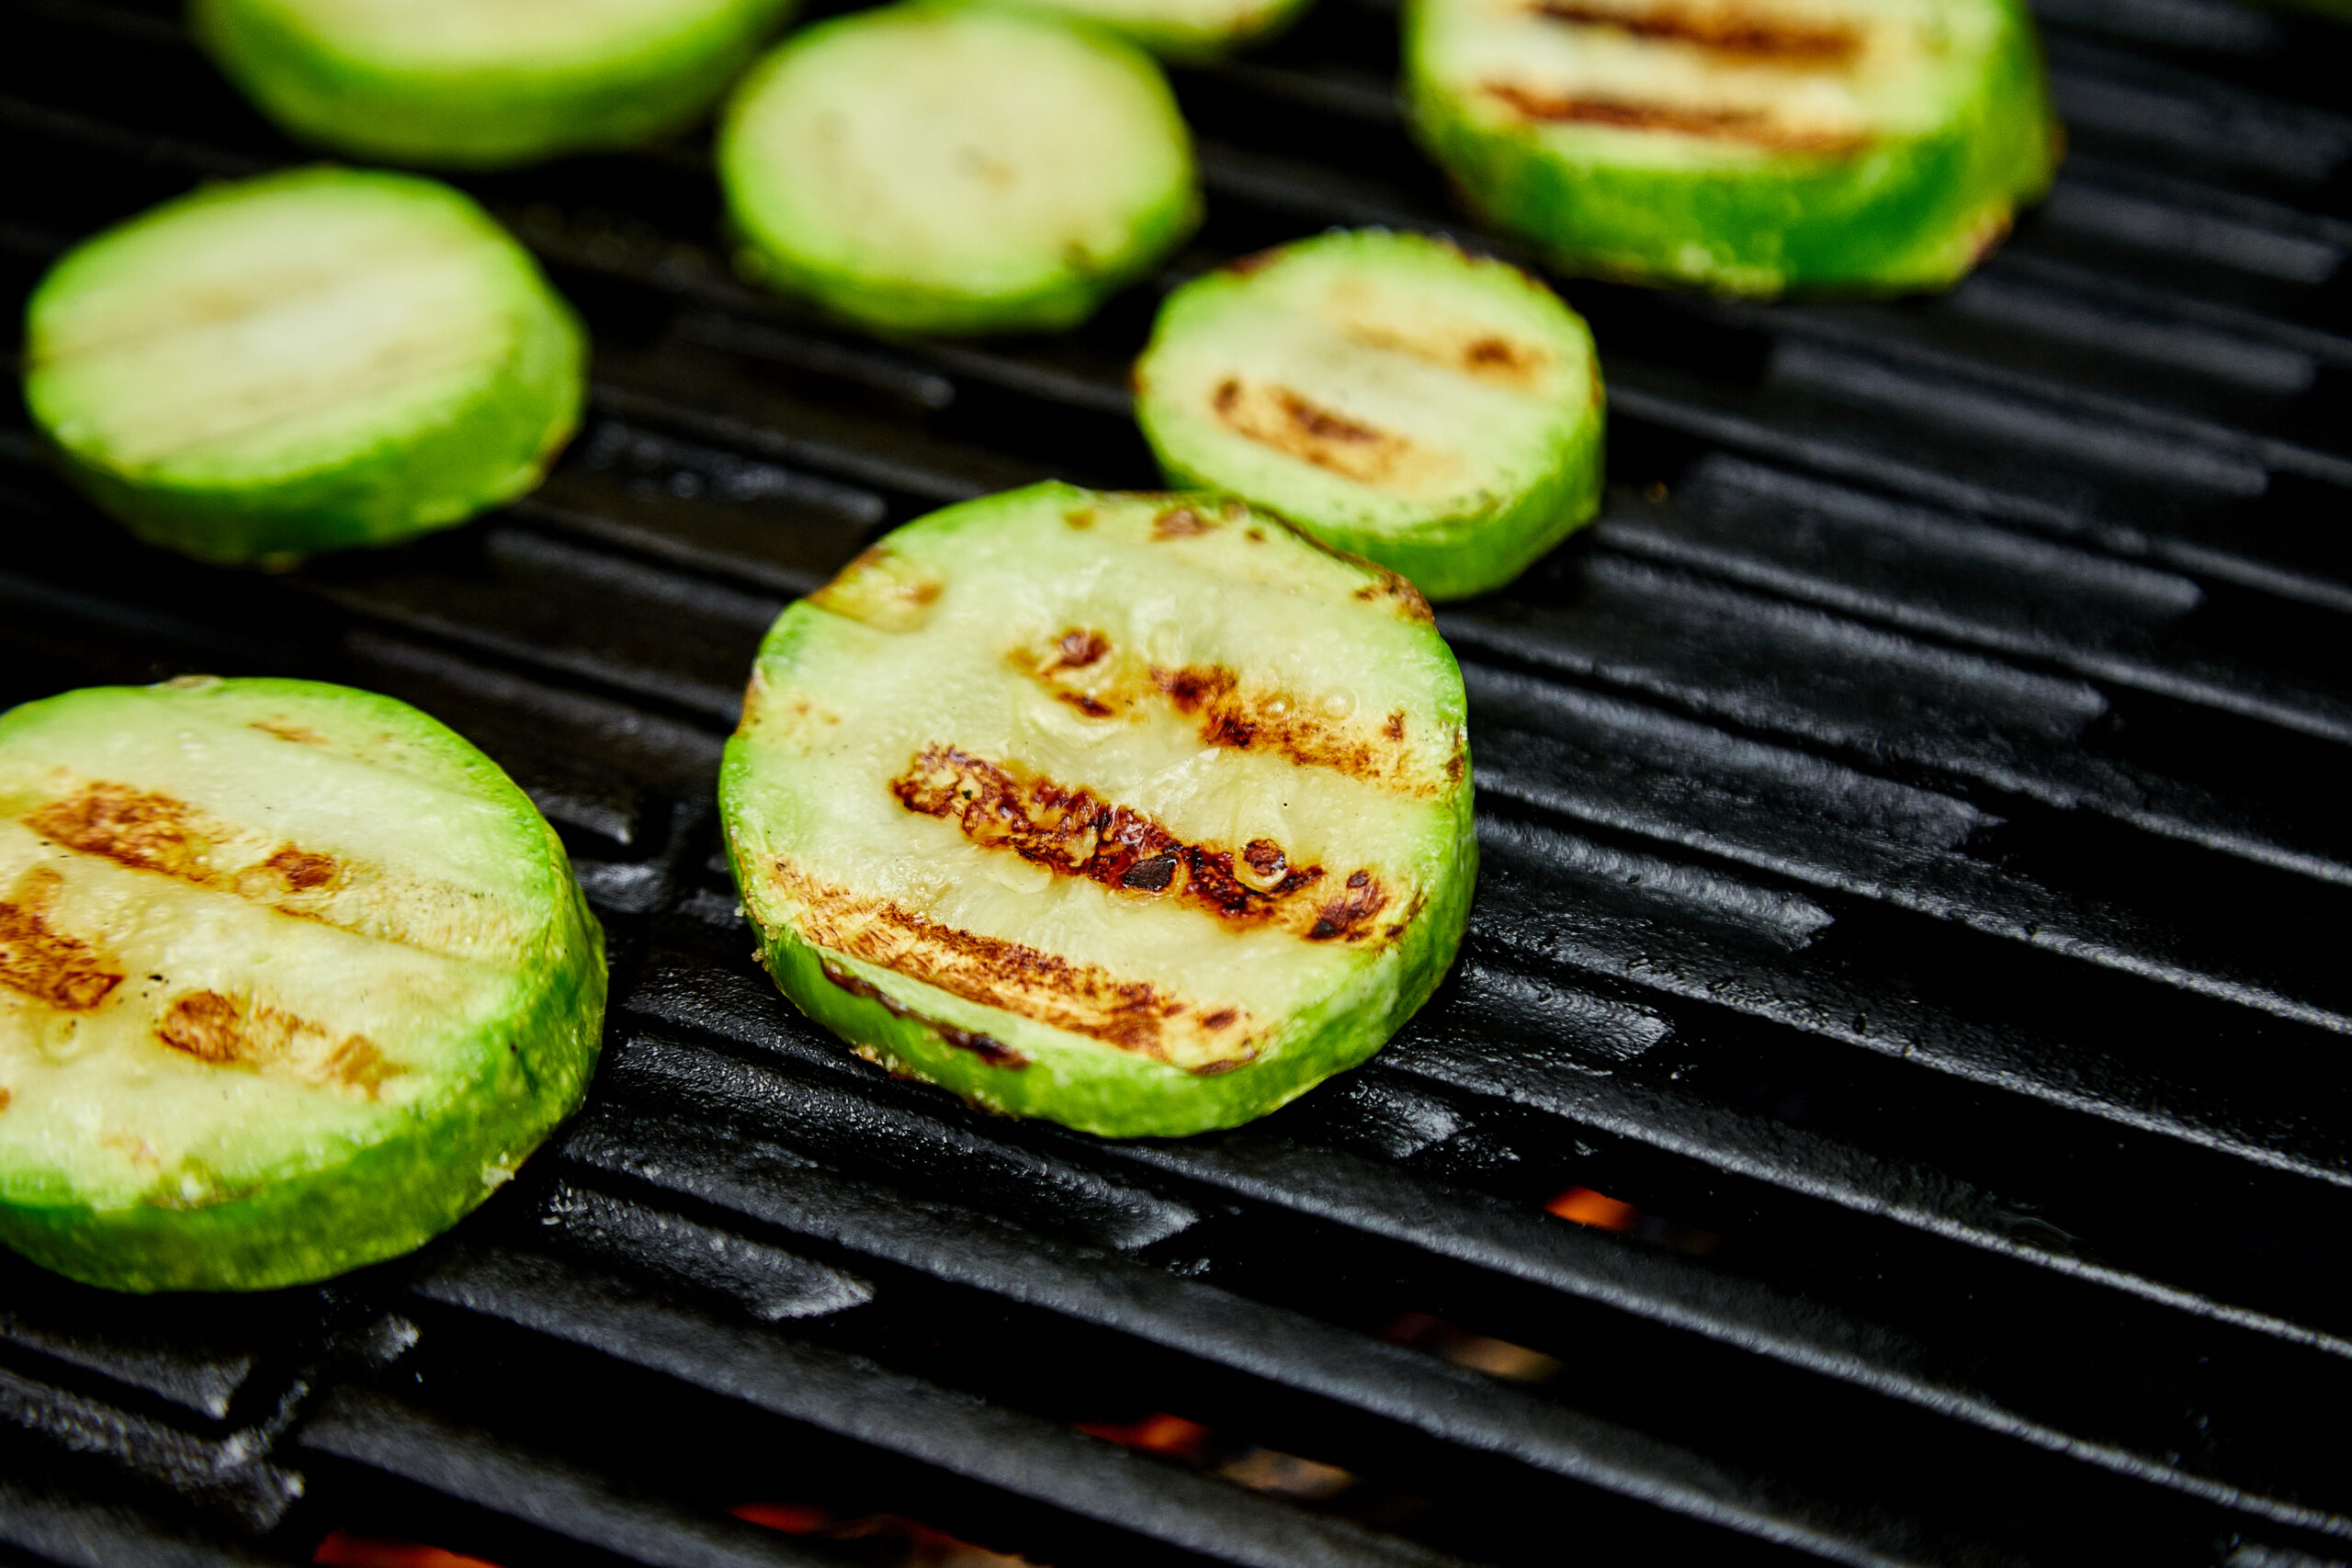 How To Cook Zucchini On The Grill